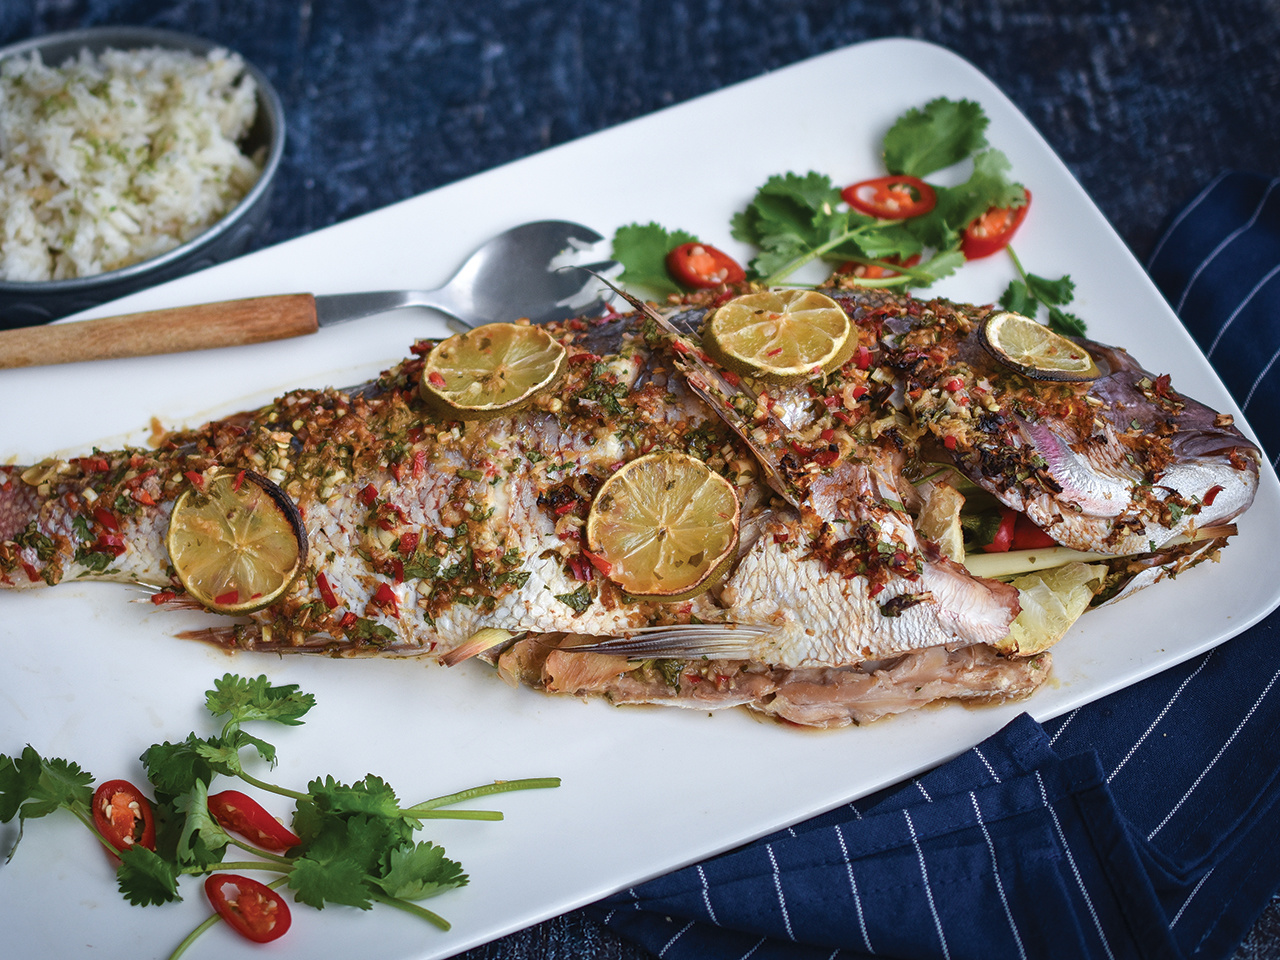  Vietnamese Whole Baked Fish with Coconut Rice

